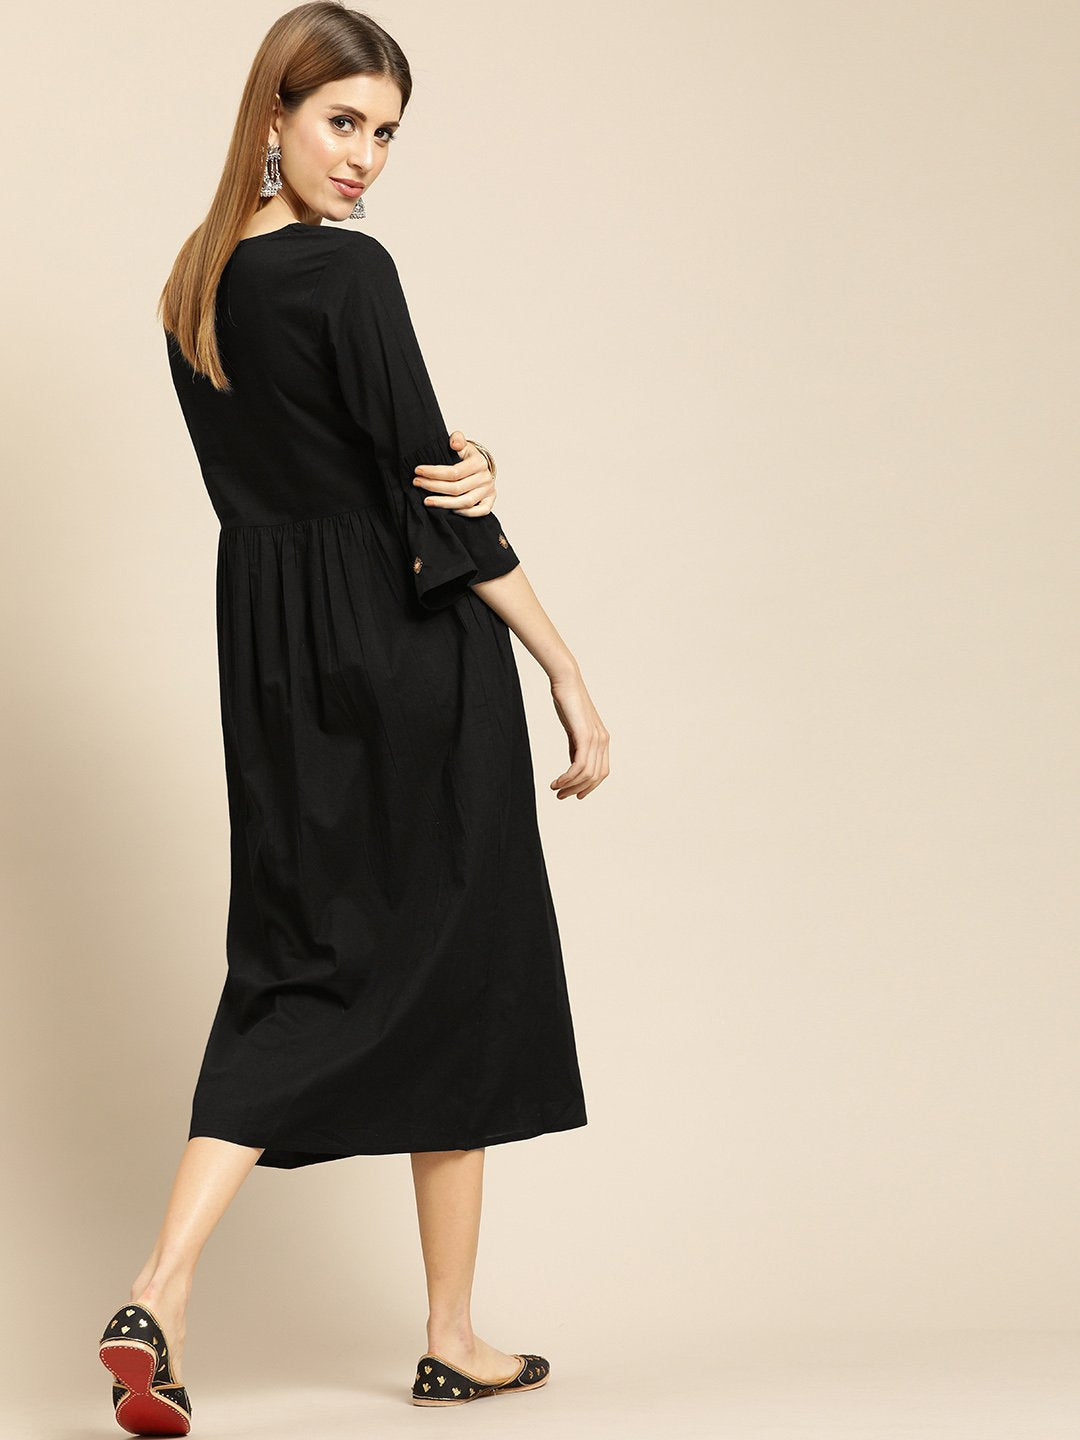 Women's Black Solid Solid Round Neck Cotton A-Line Dress - Nayo Clothing